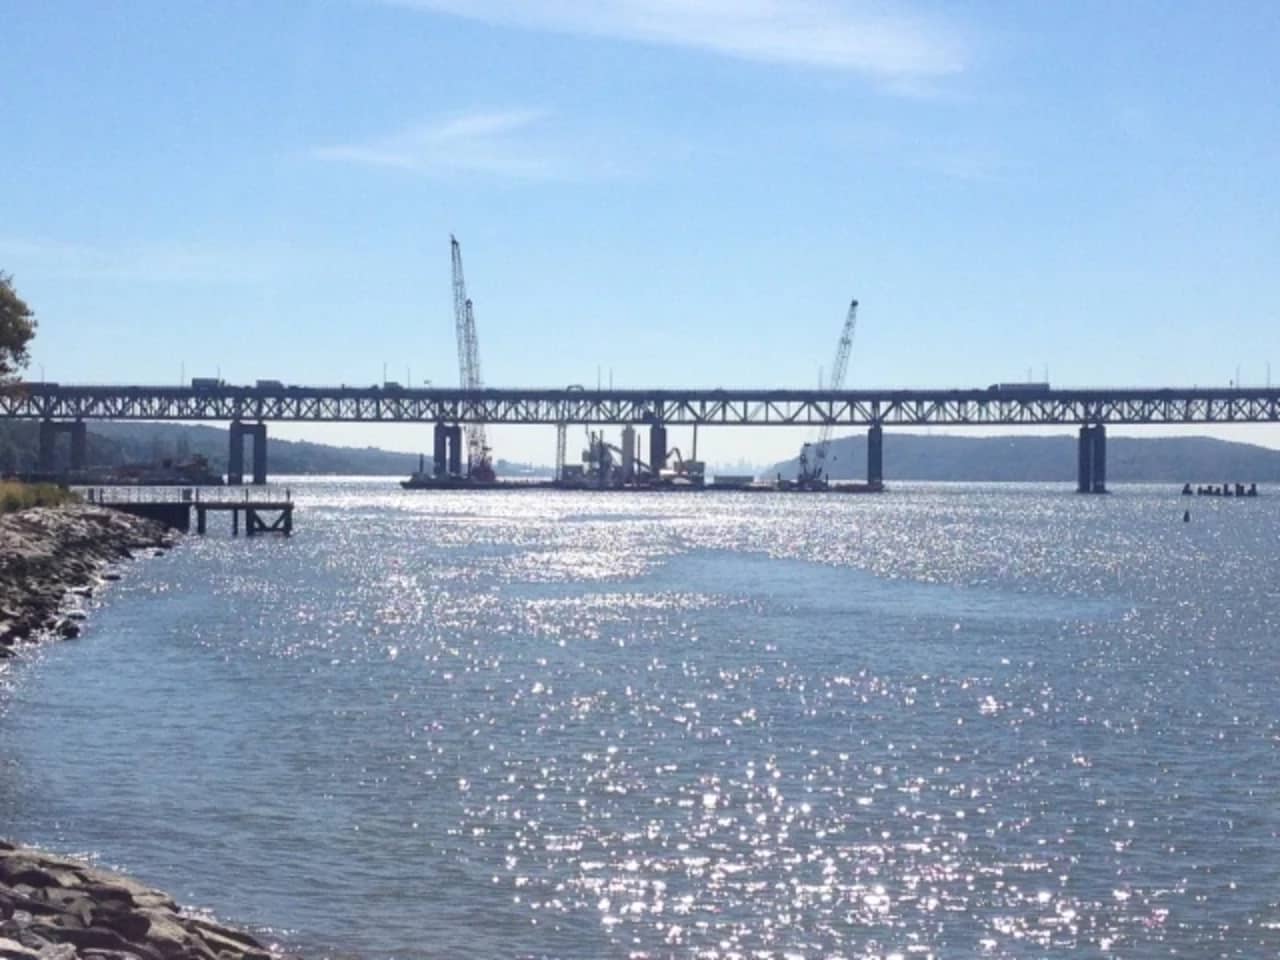 Construction on the new bridge will force overnight ramp closures this week.